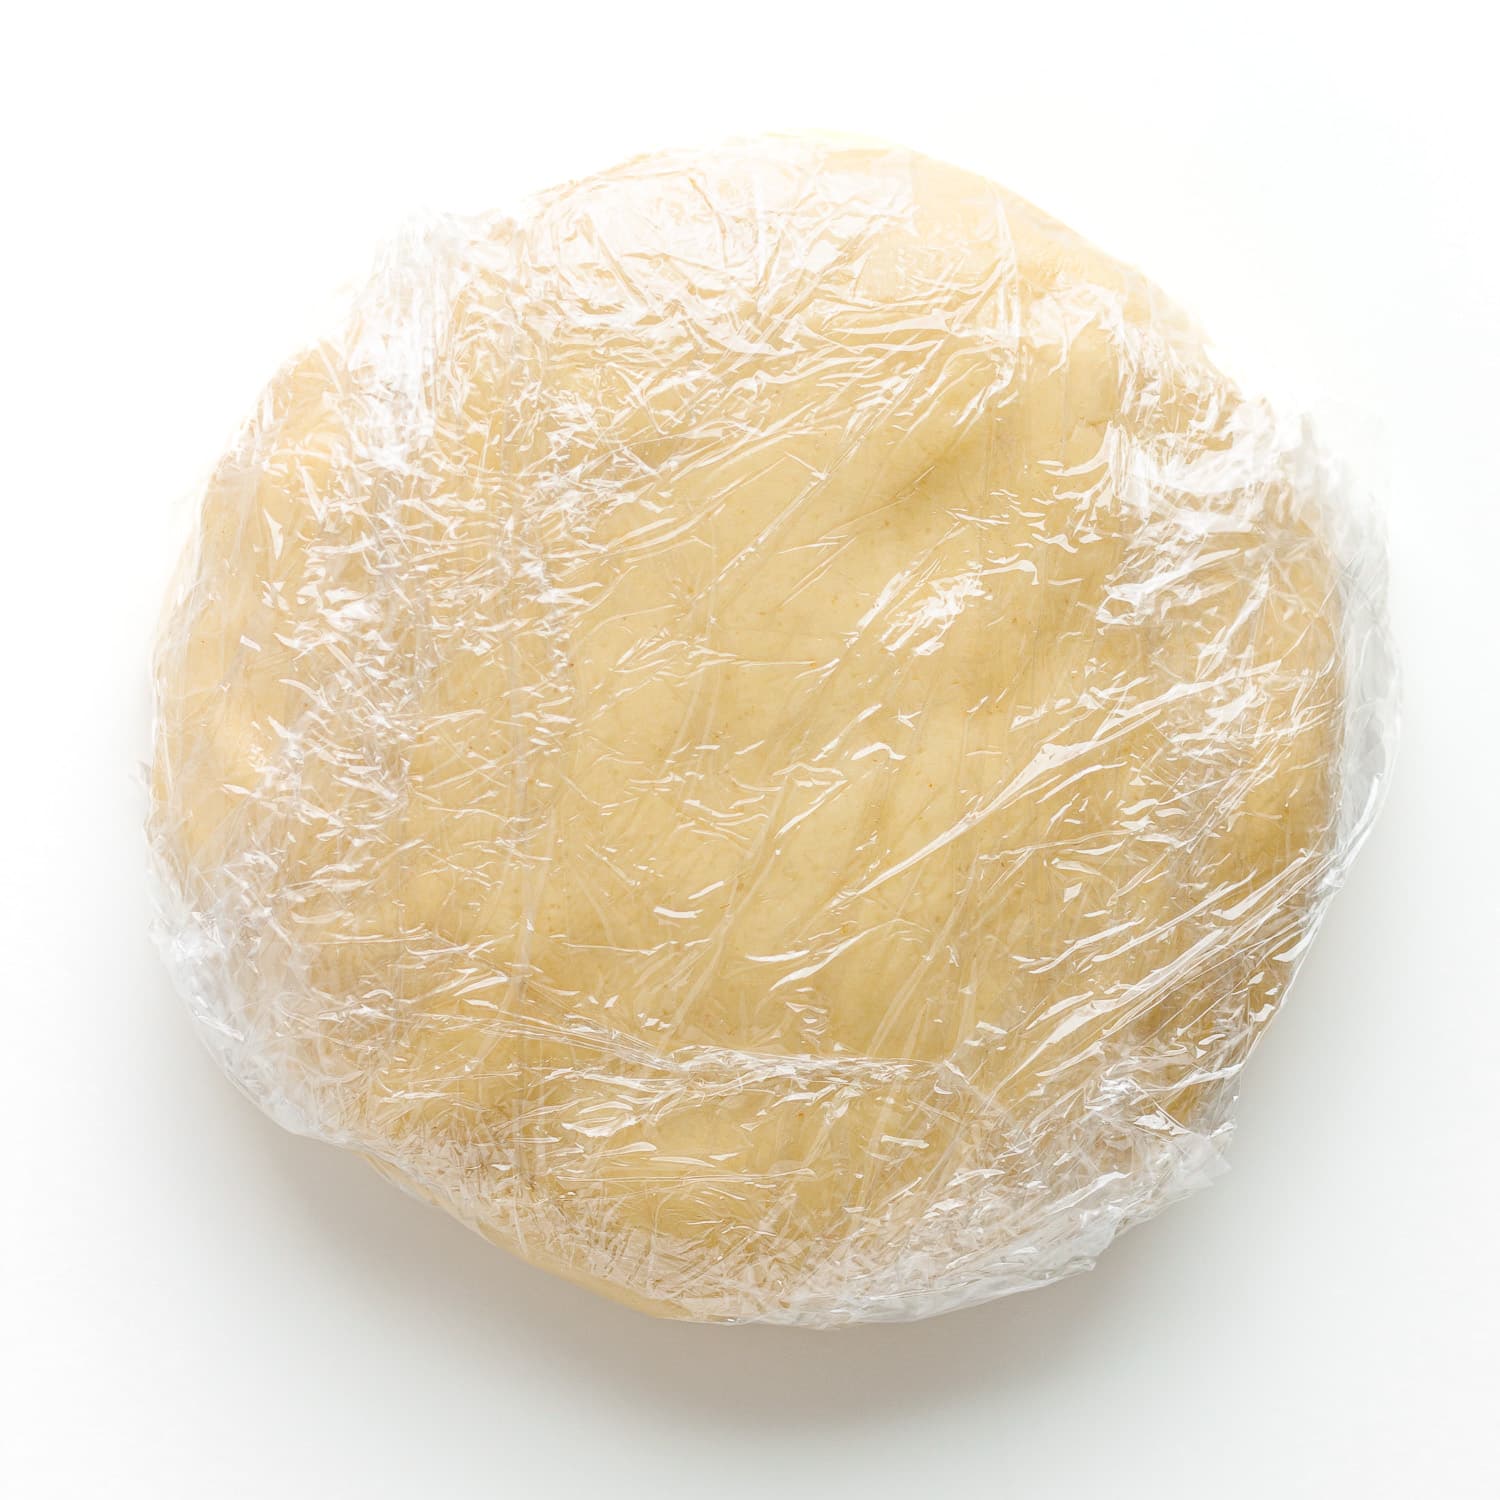 Disc shaped cookie dough wrapped in plastic wrap.